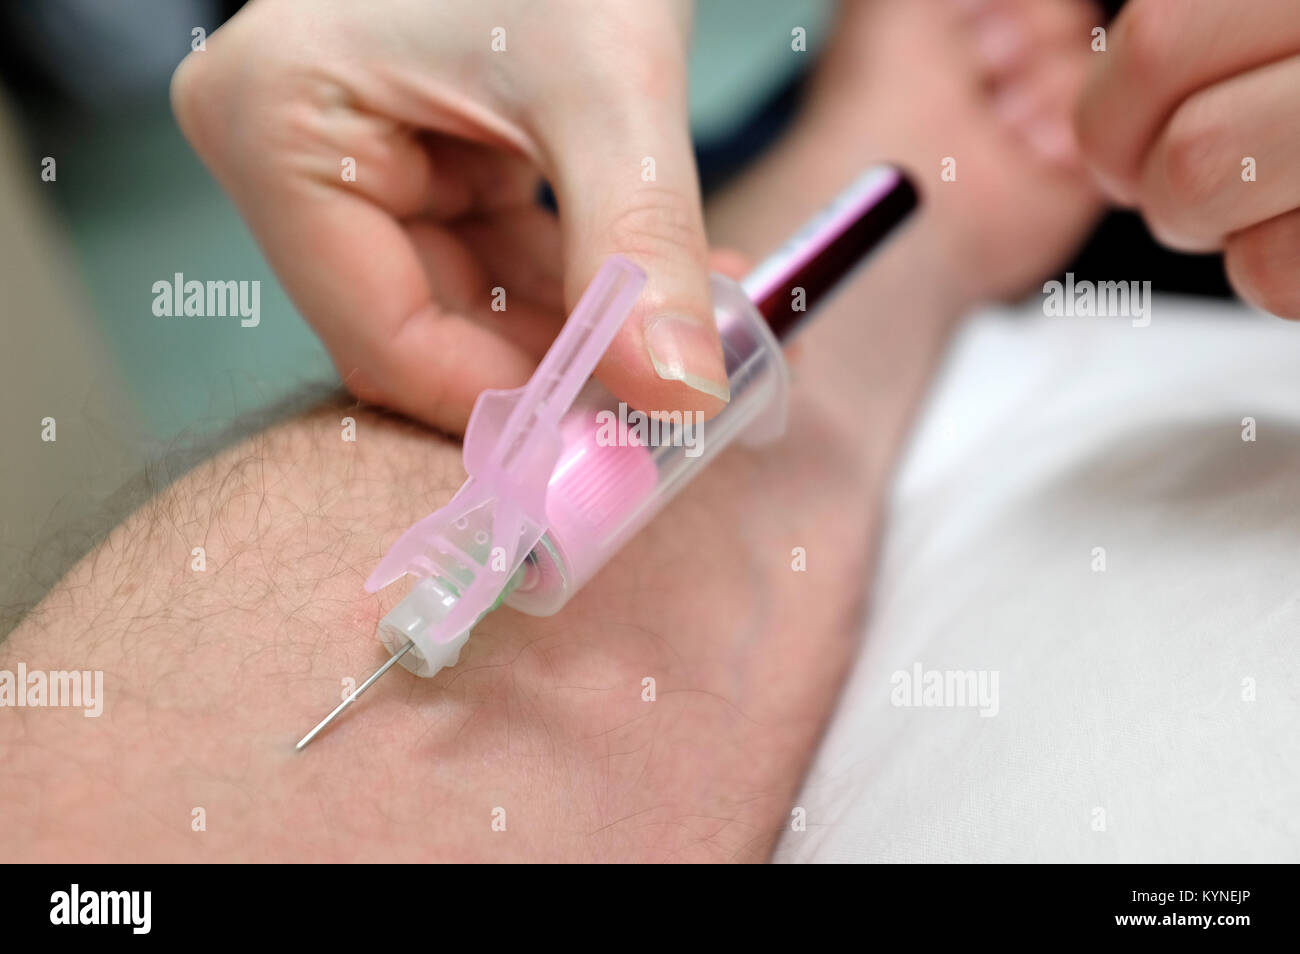 taking blood sample from male arm Stock Photo